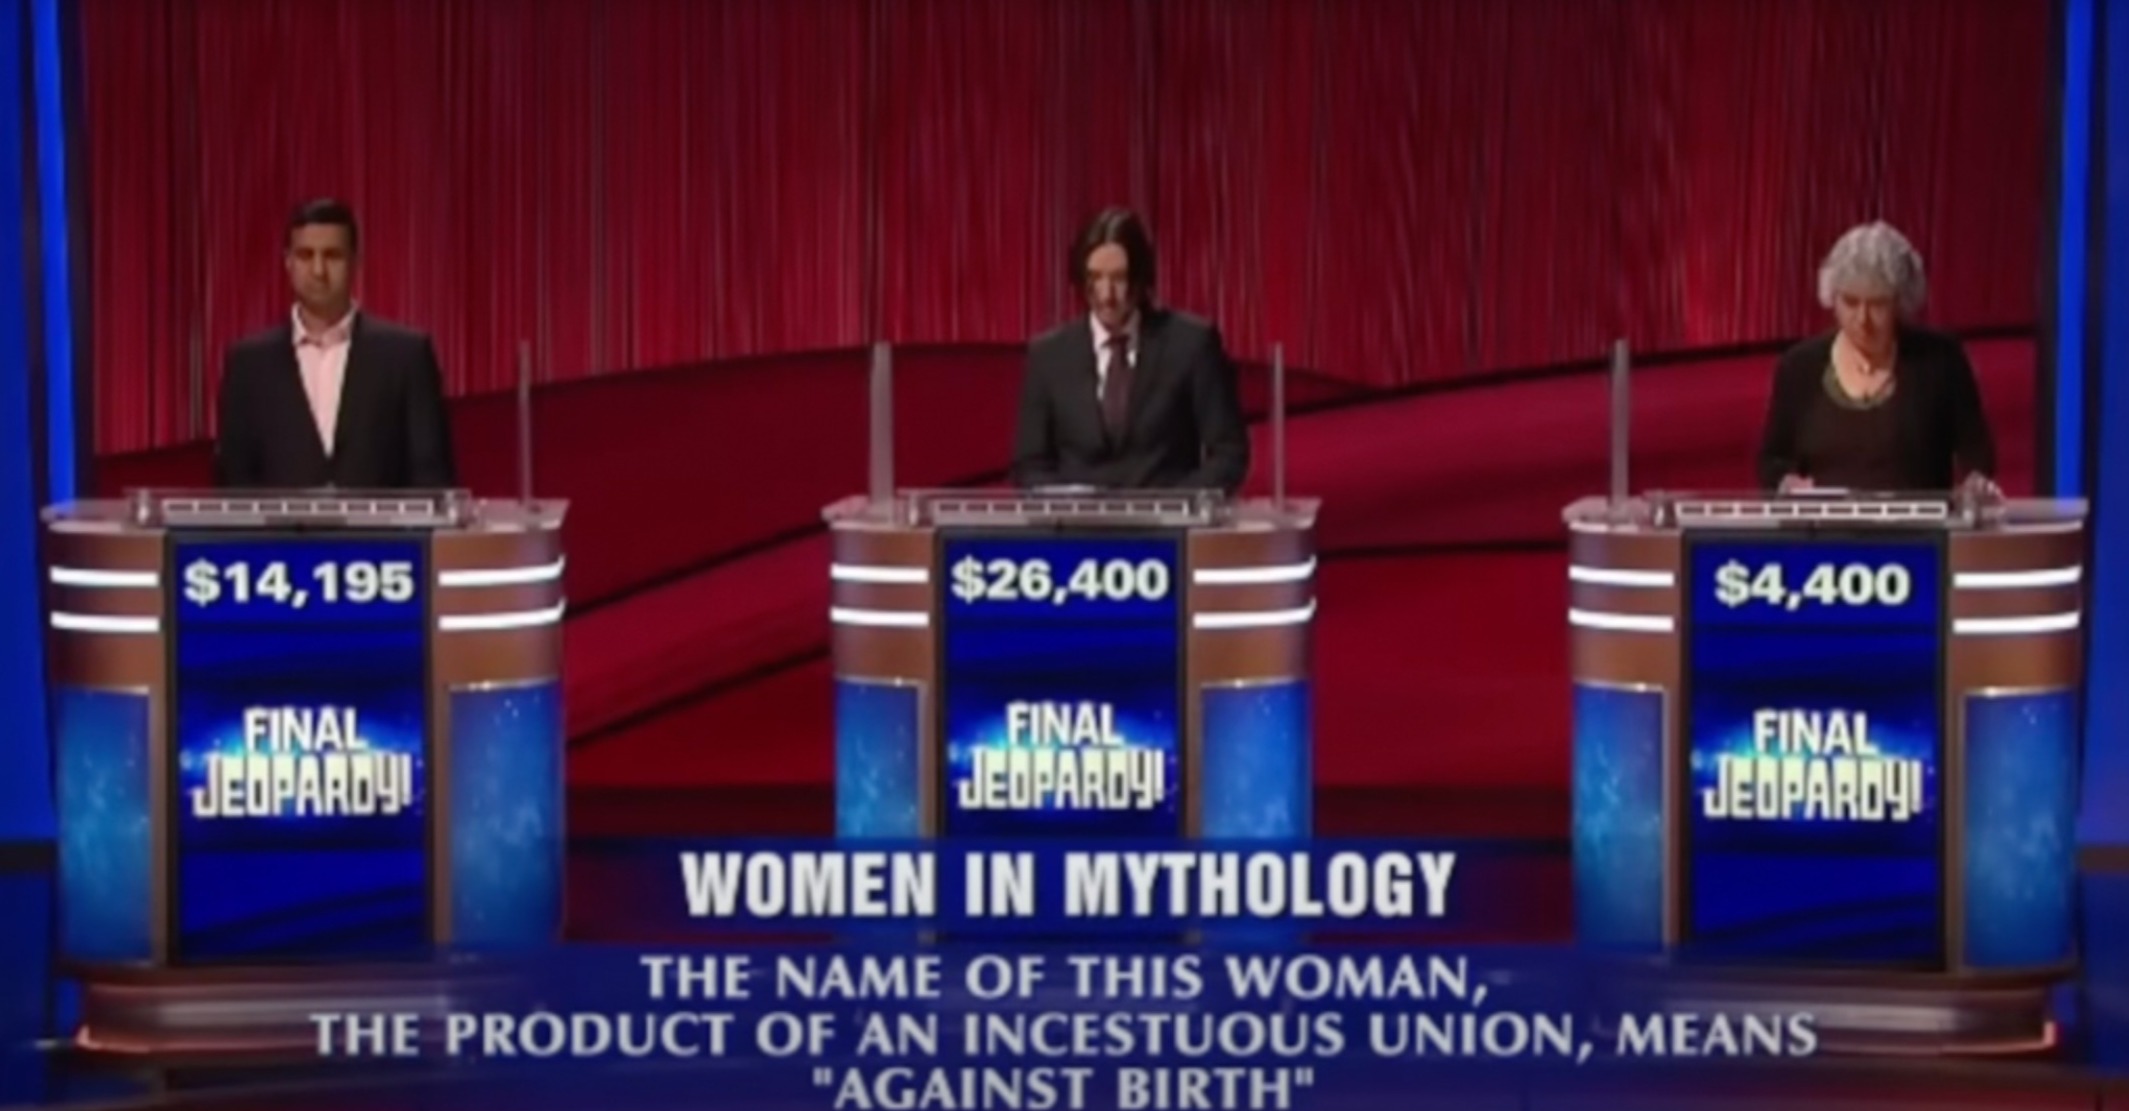 Jeopardy! host Mayim Bialik shocked by tense 'close game' as